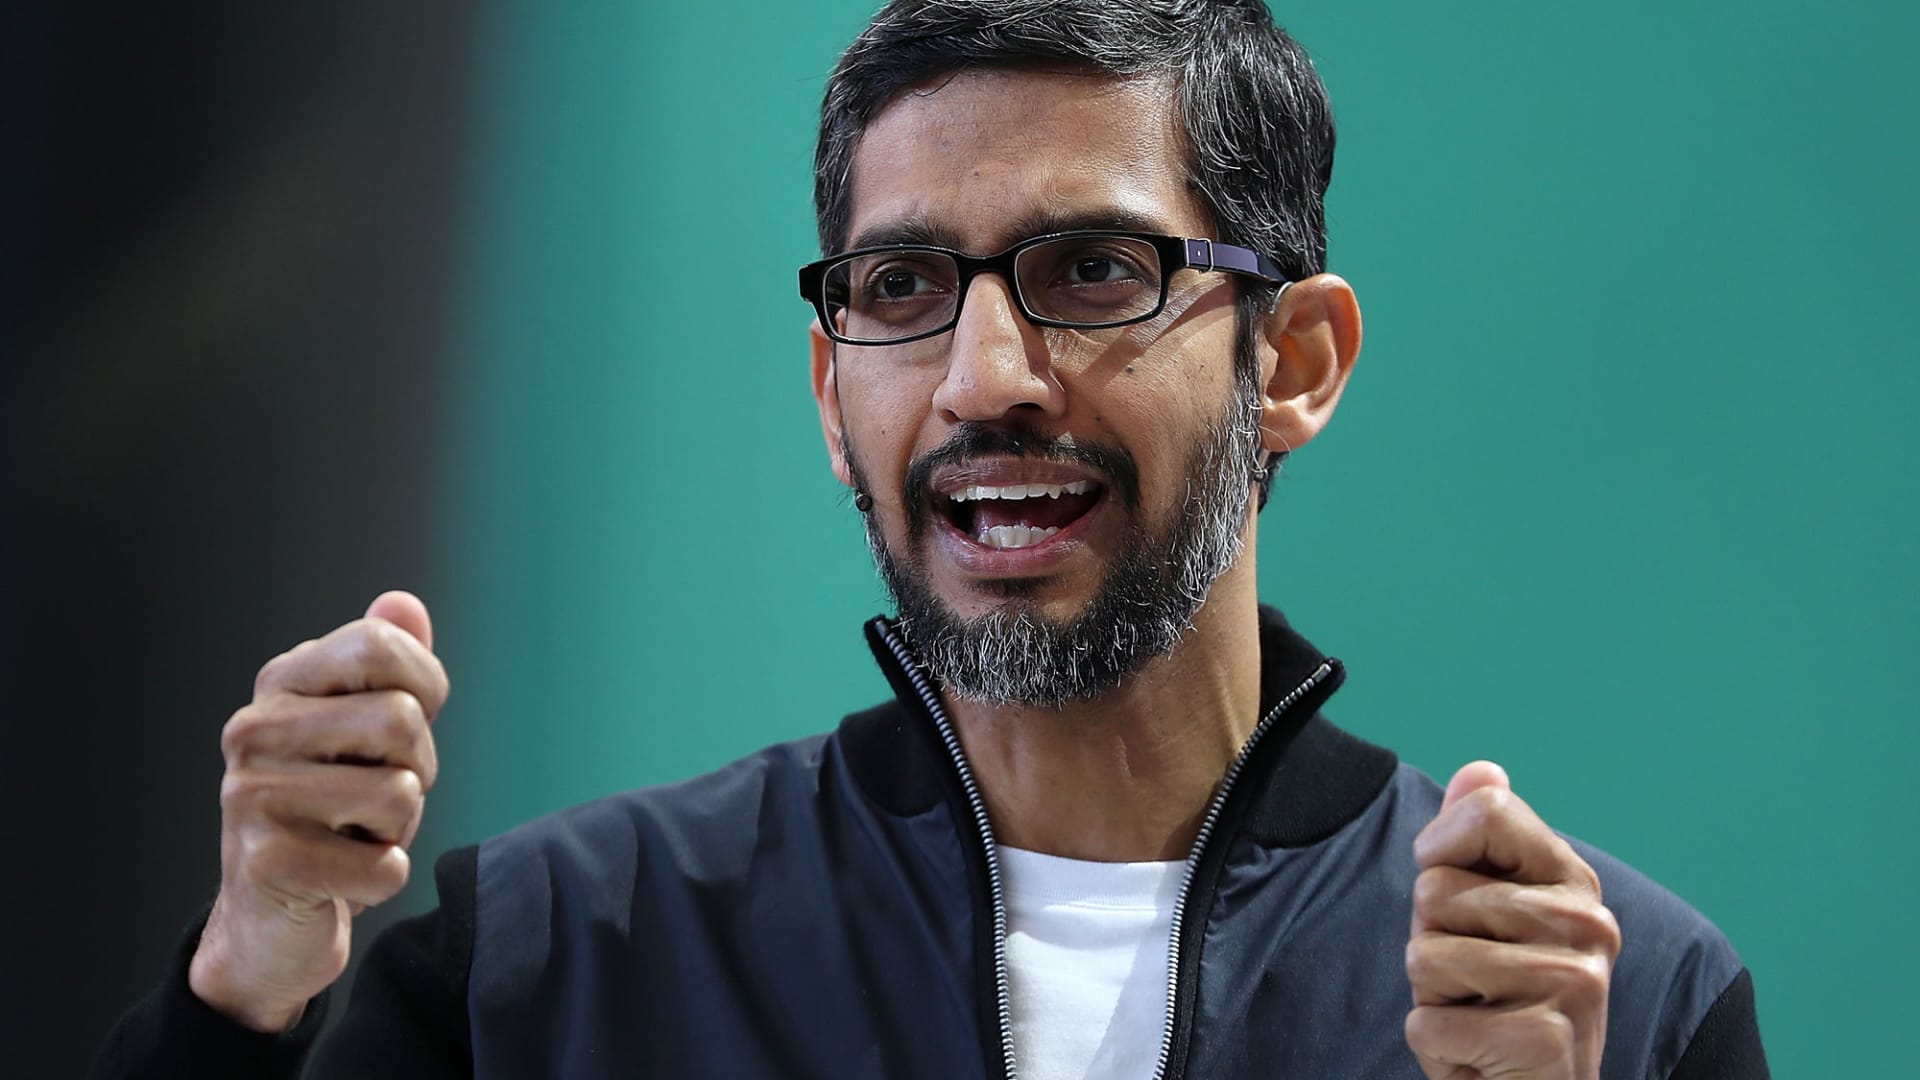 Google asks employees to rewrite Bard’s bad responses, says the A.I. ‘learns best by example’